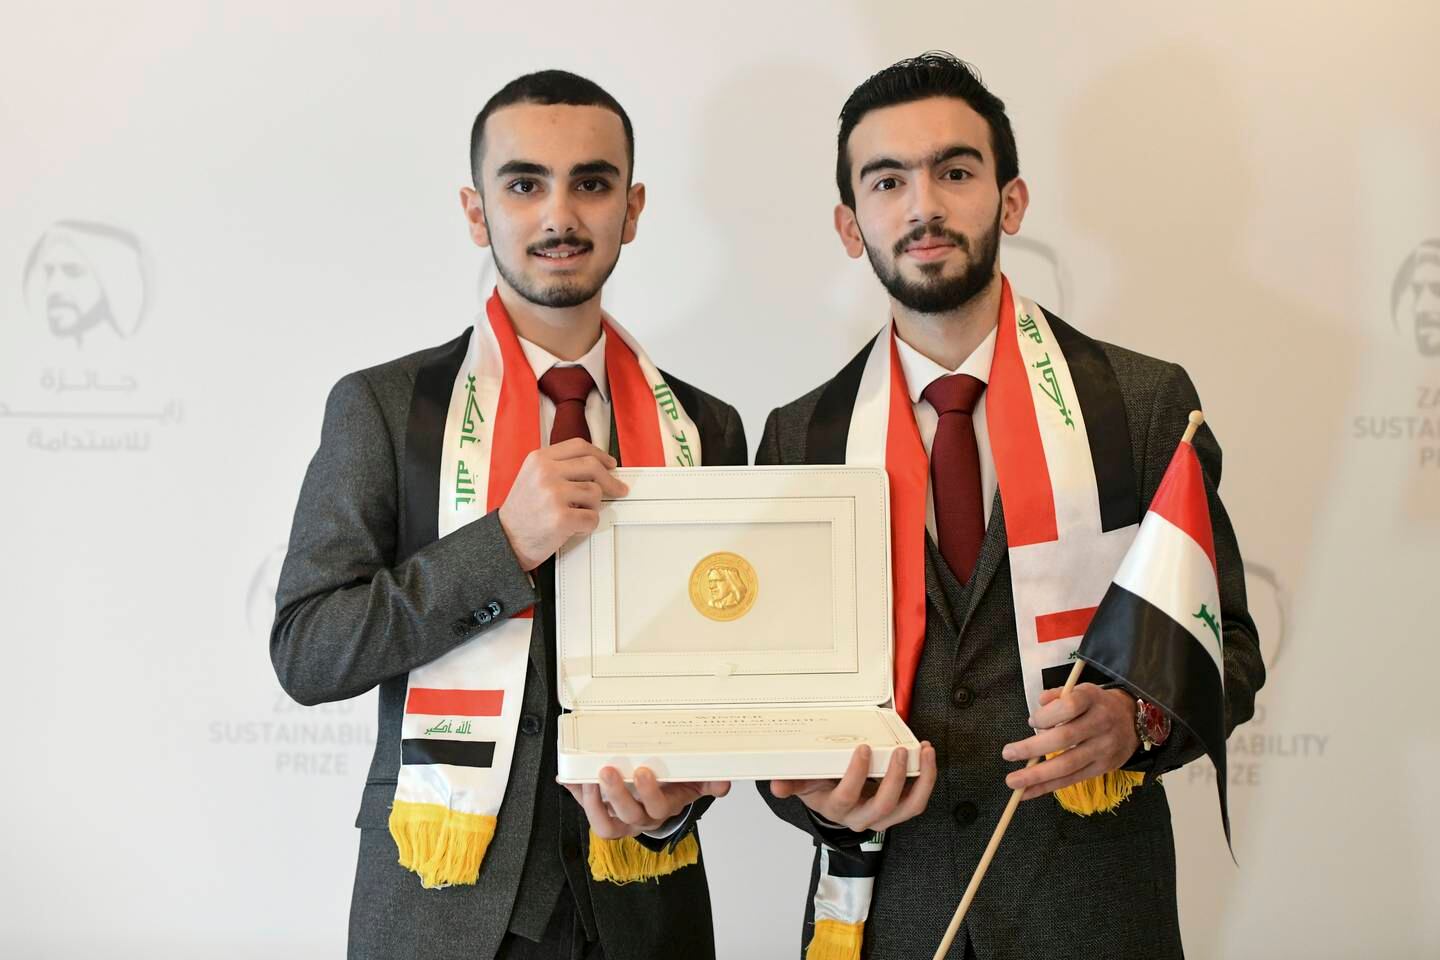 Abdulrahman Neshat and Mohammed Ali, both 16, from Iraq, winners of the Zayed Sustainability Prize in the Global High Schools category. Khushnum Bhandari / The National